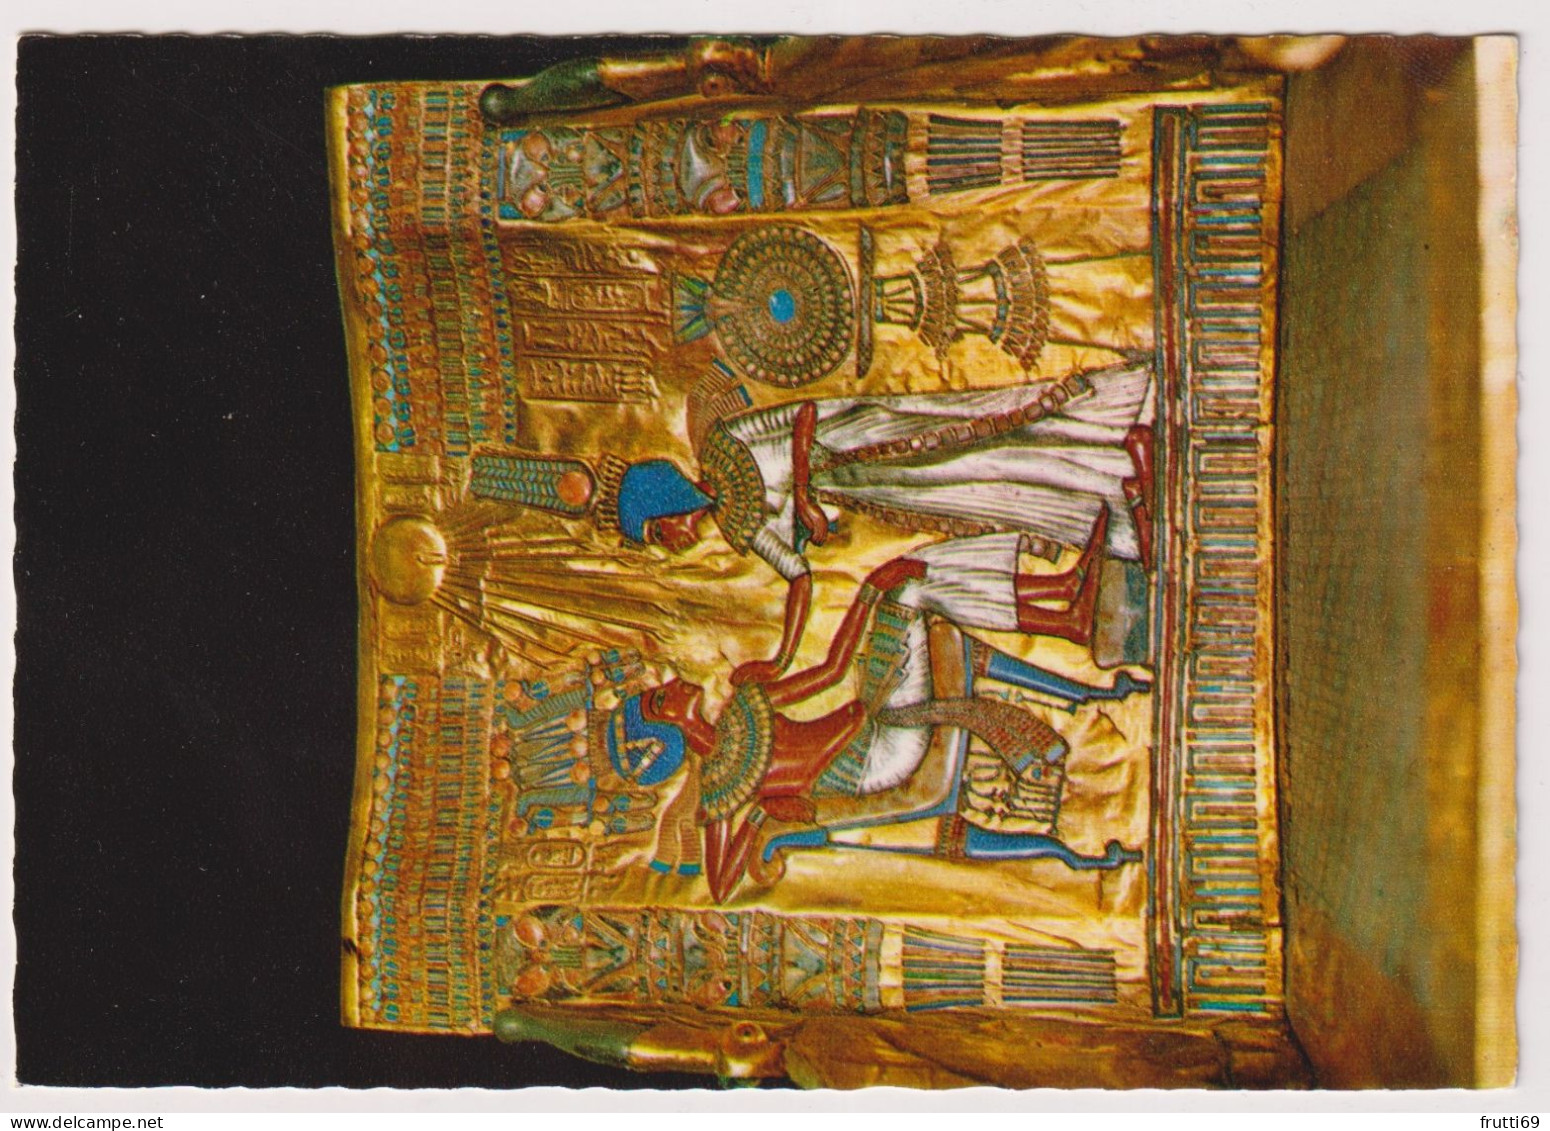 AK 198255 EGYPT - Cairo - The Egyptian Museum - The Throne Of King Tut-Ankh Amun - Museums